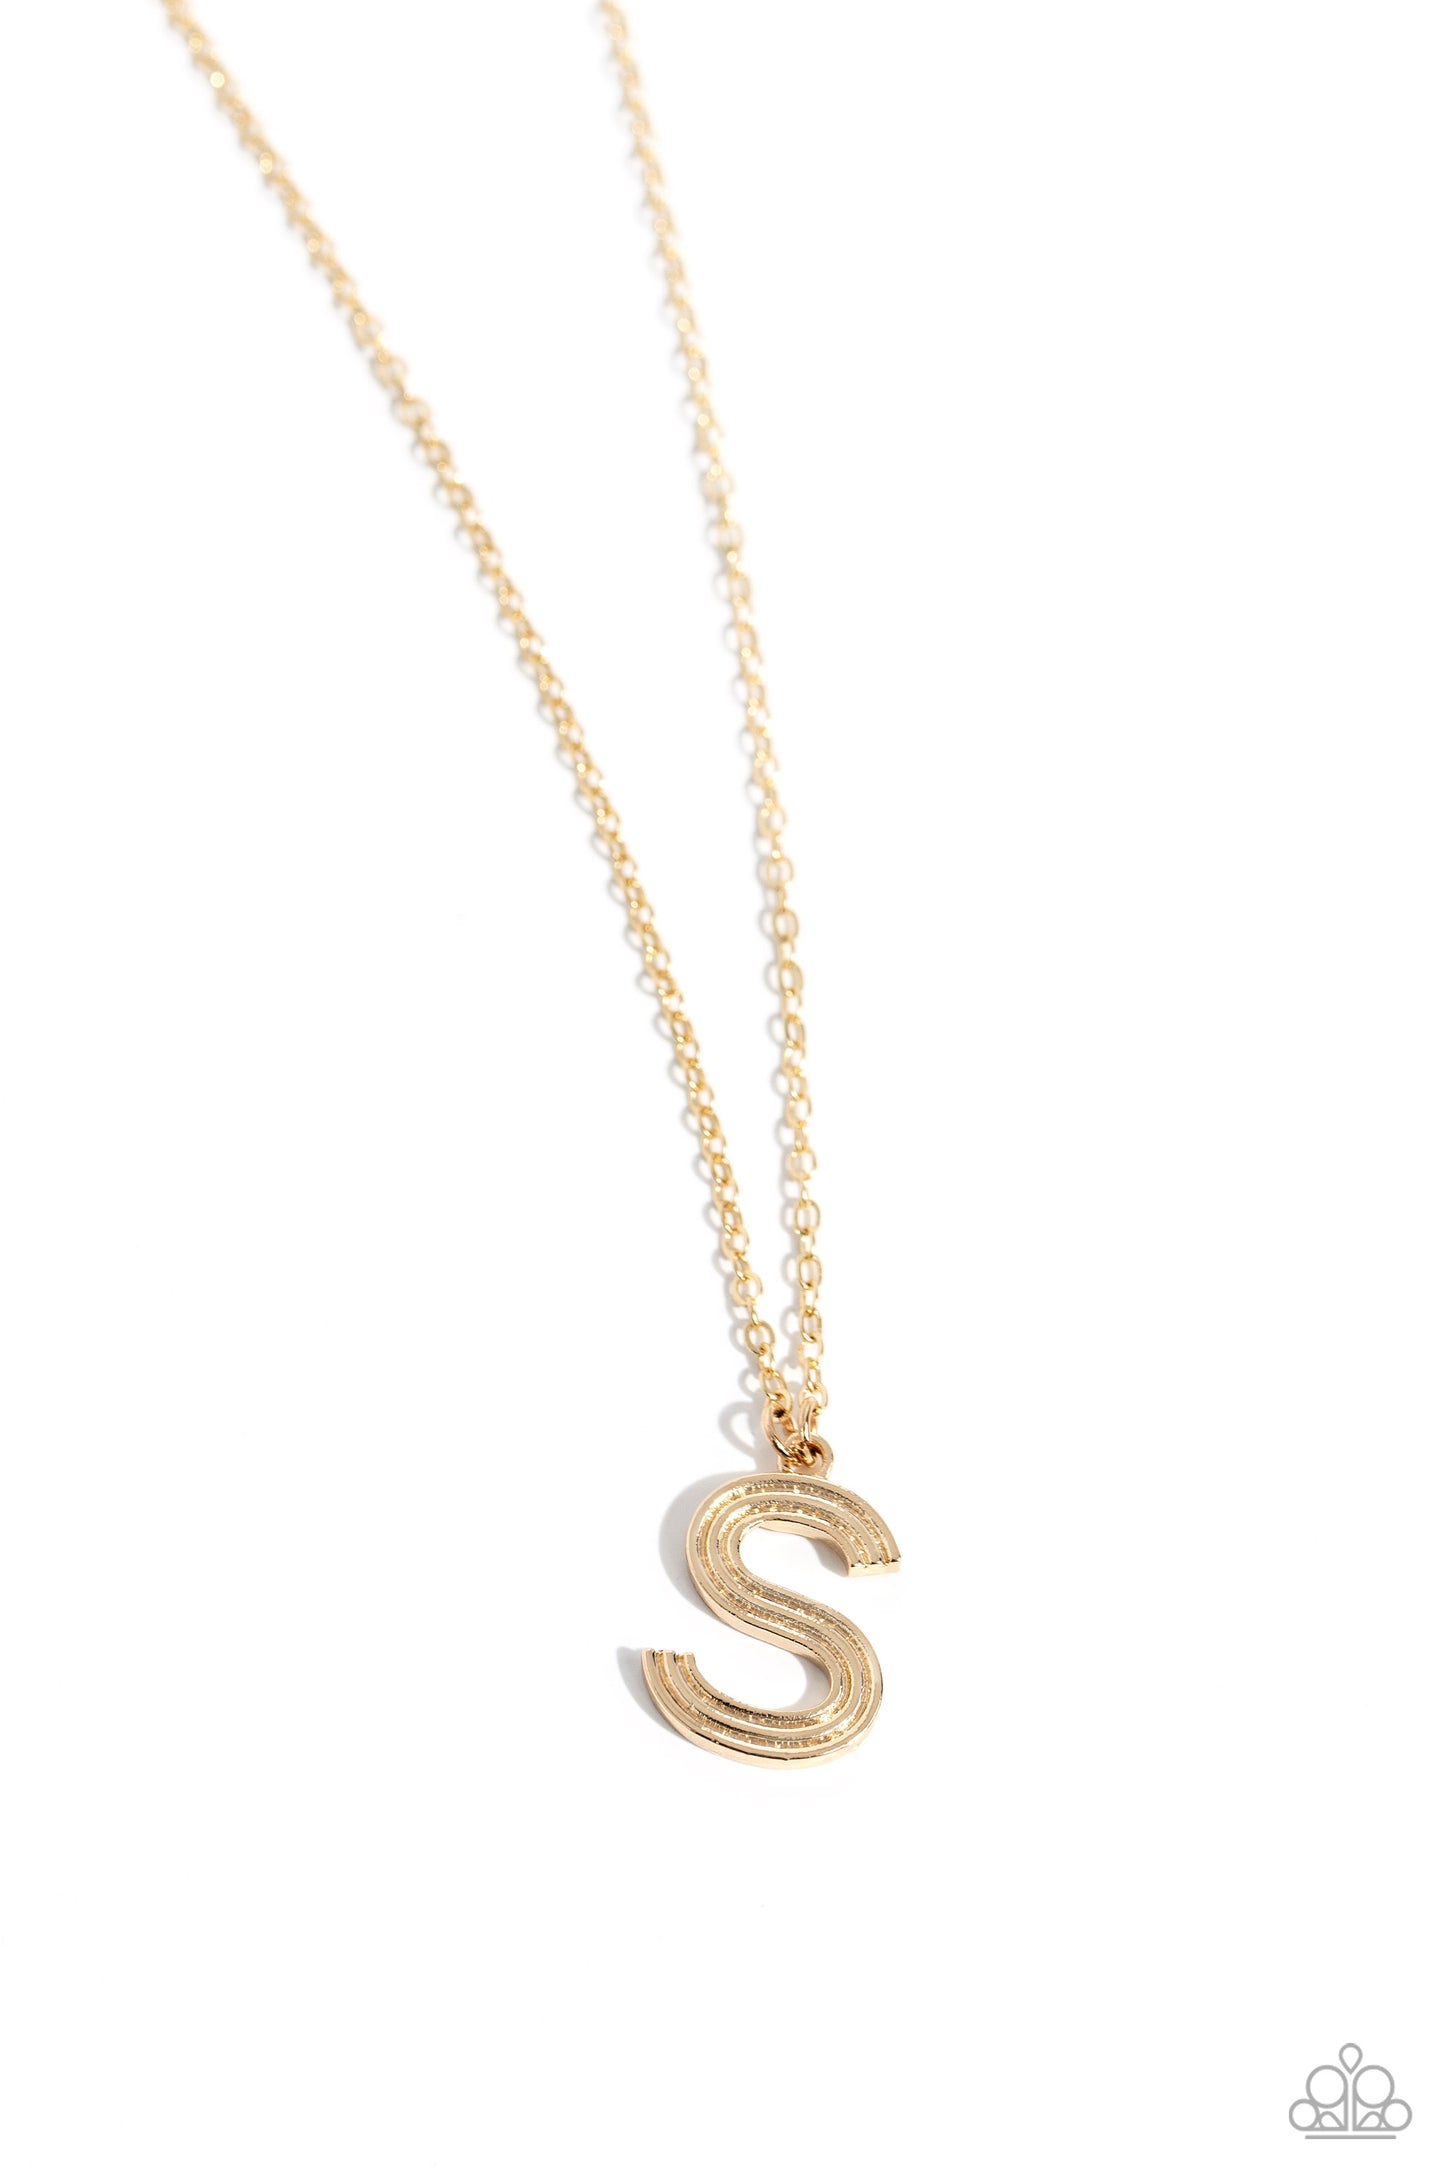 "Leave Your Initials" - Gold #502 - Paparazzi Accessories